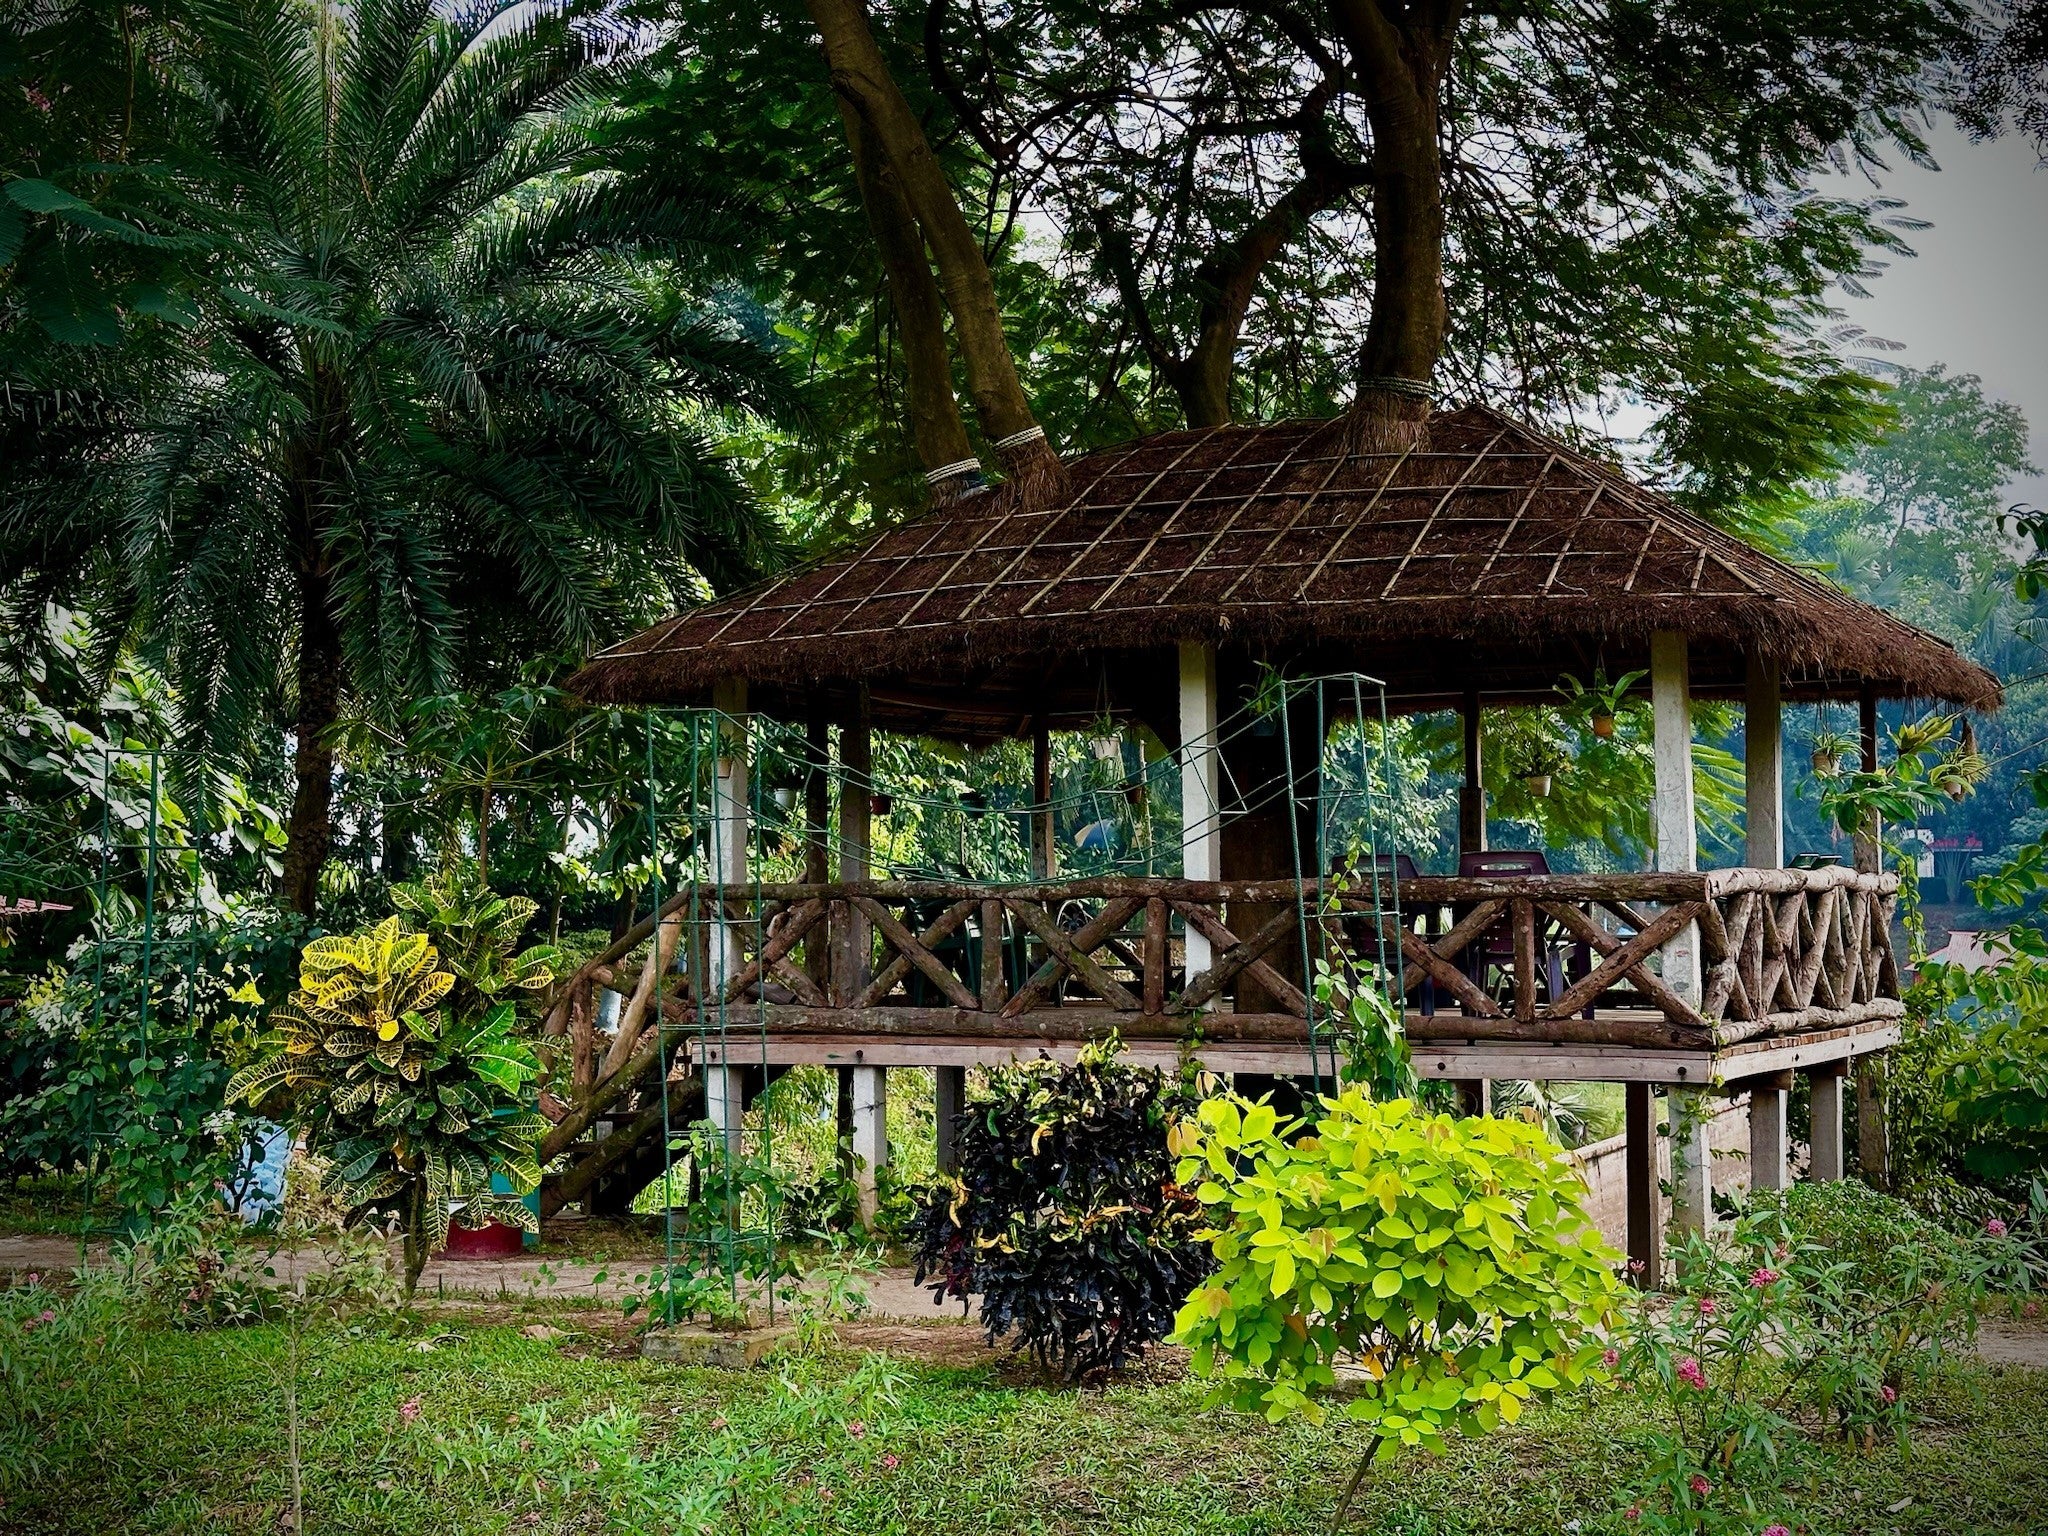 Charming wooden gazebo nestled in the lush gardens of Barnochata, a tranquil Dhaka hotel and resort located in Savar.